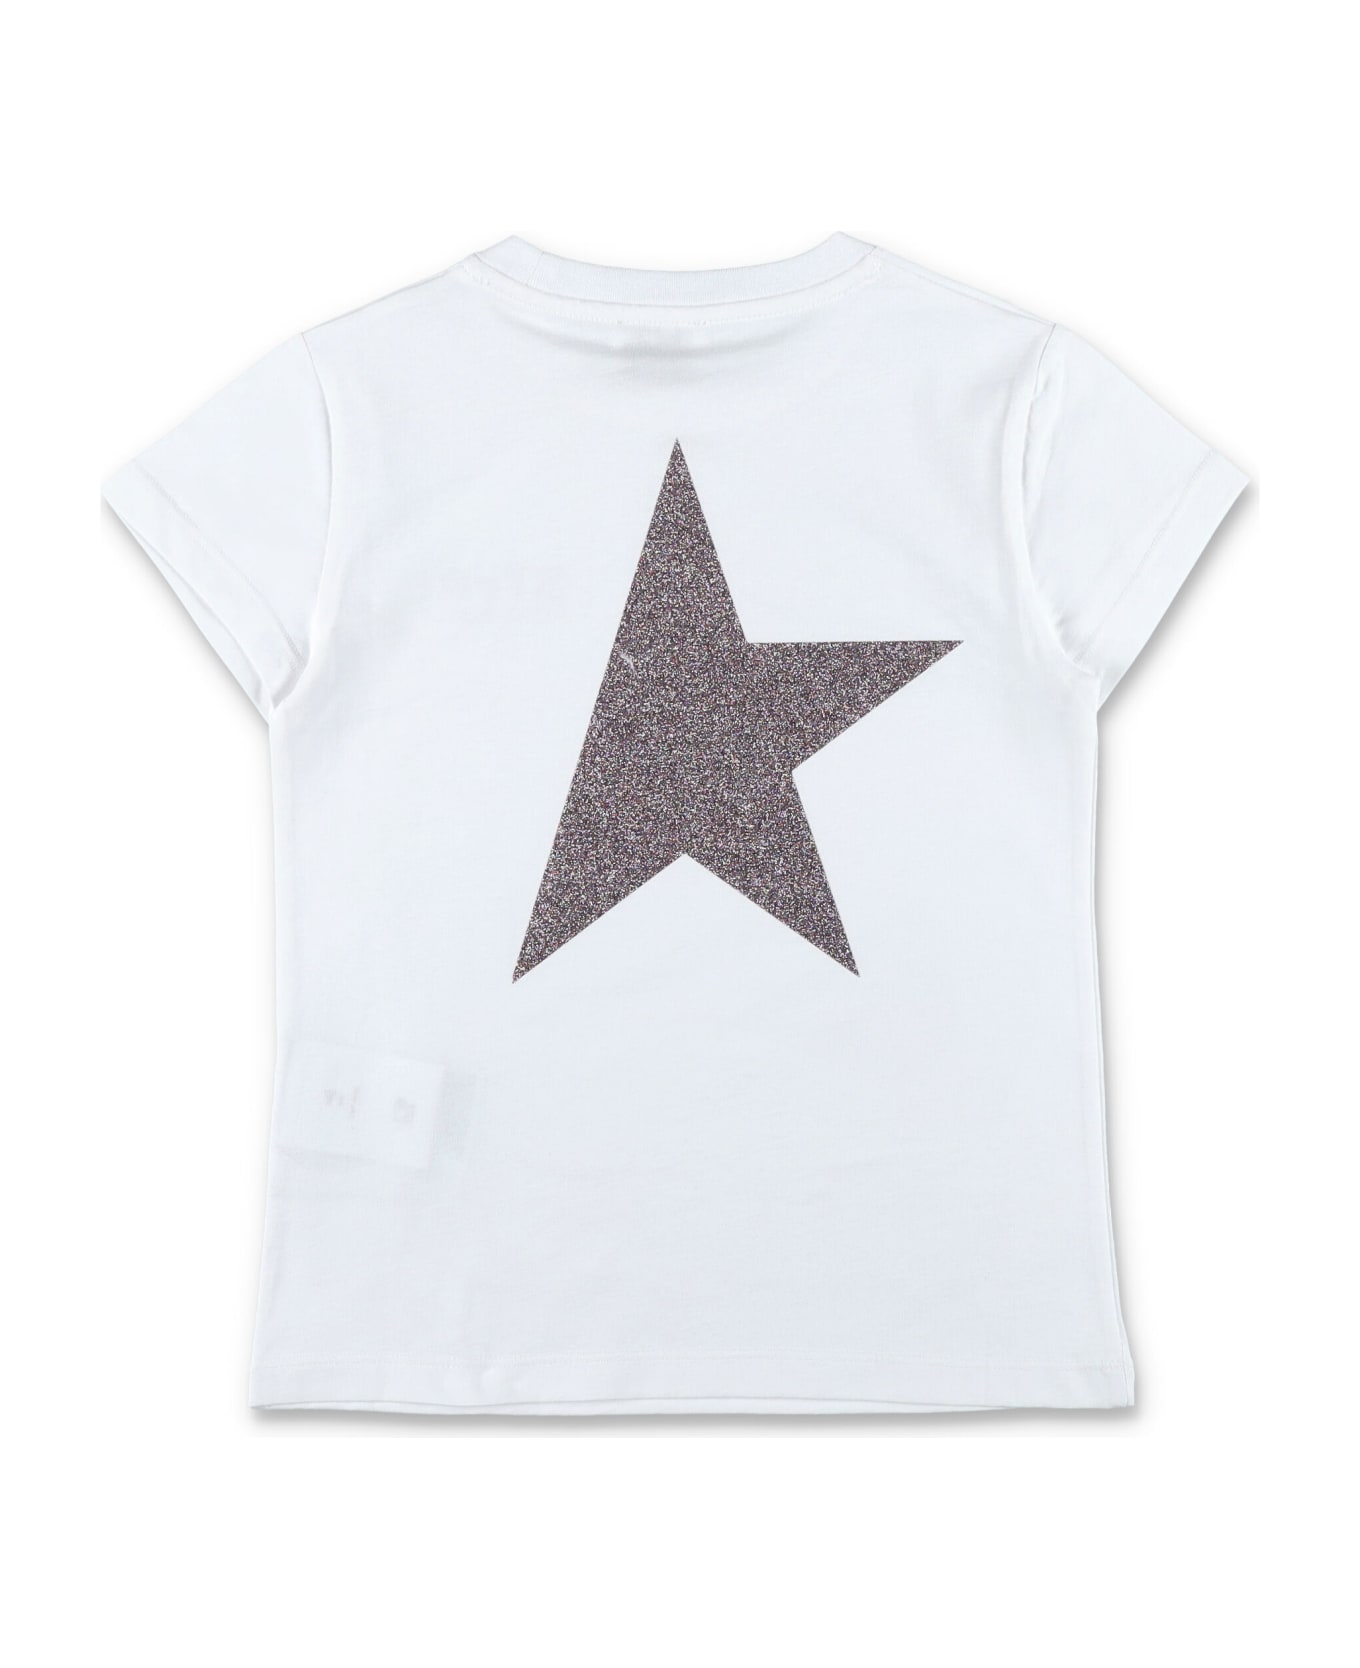 Golden Goose T-shirt Star - WHITE/PINK Tシャツ＆ポロシャツ